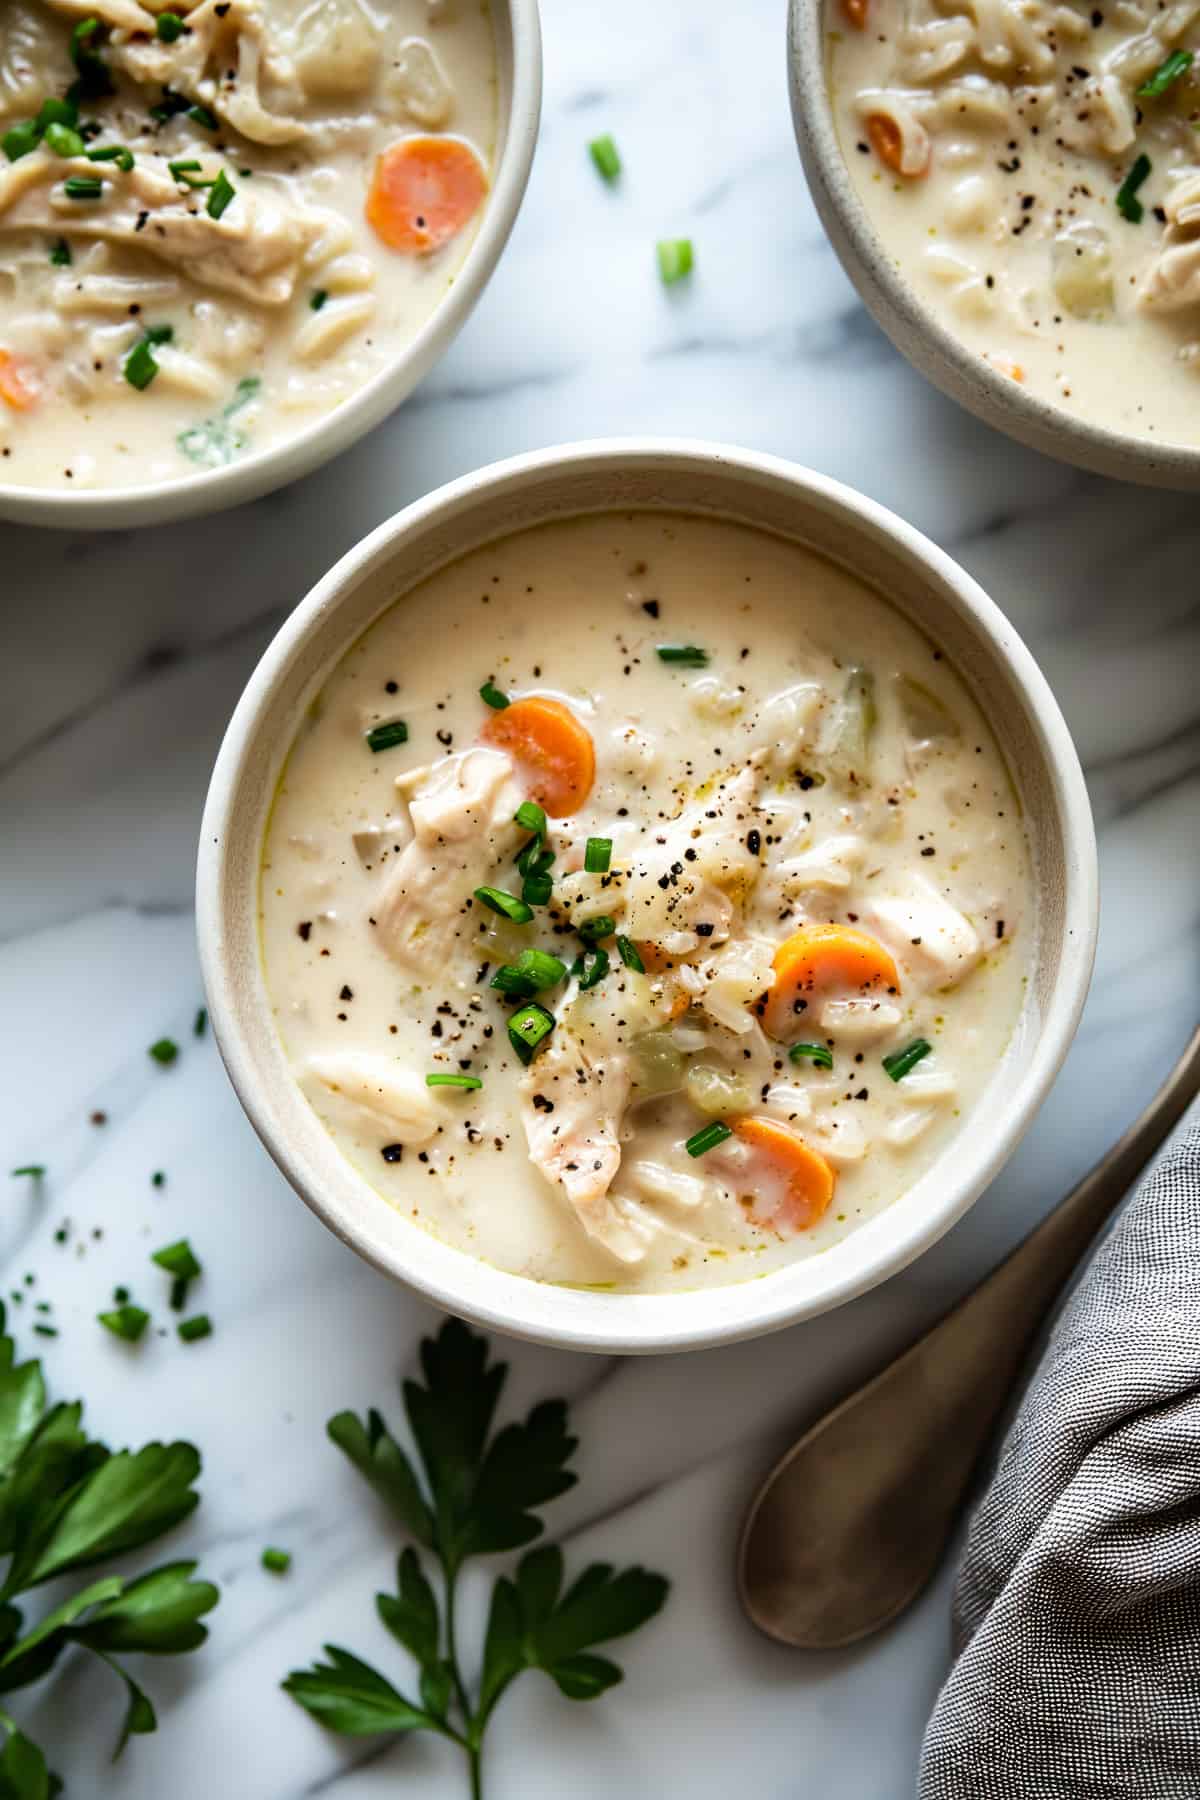 Creamy chicken and rice soup with vegetables.